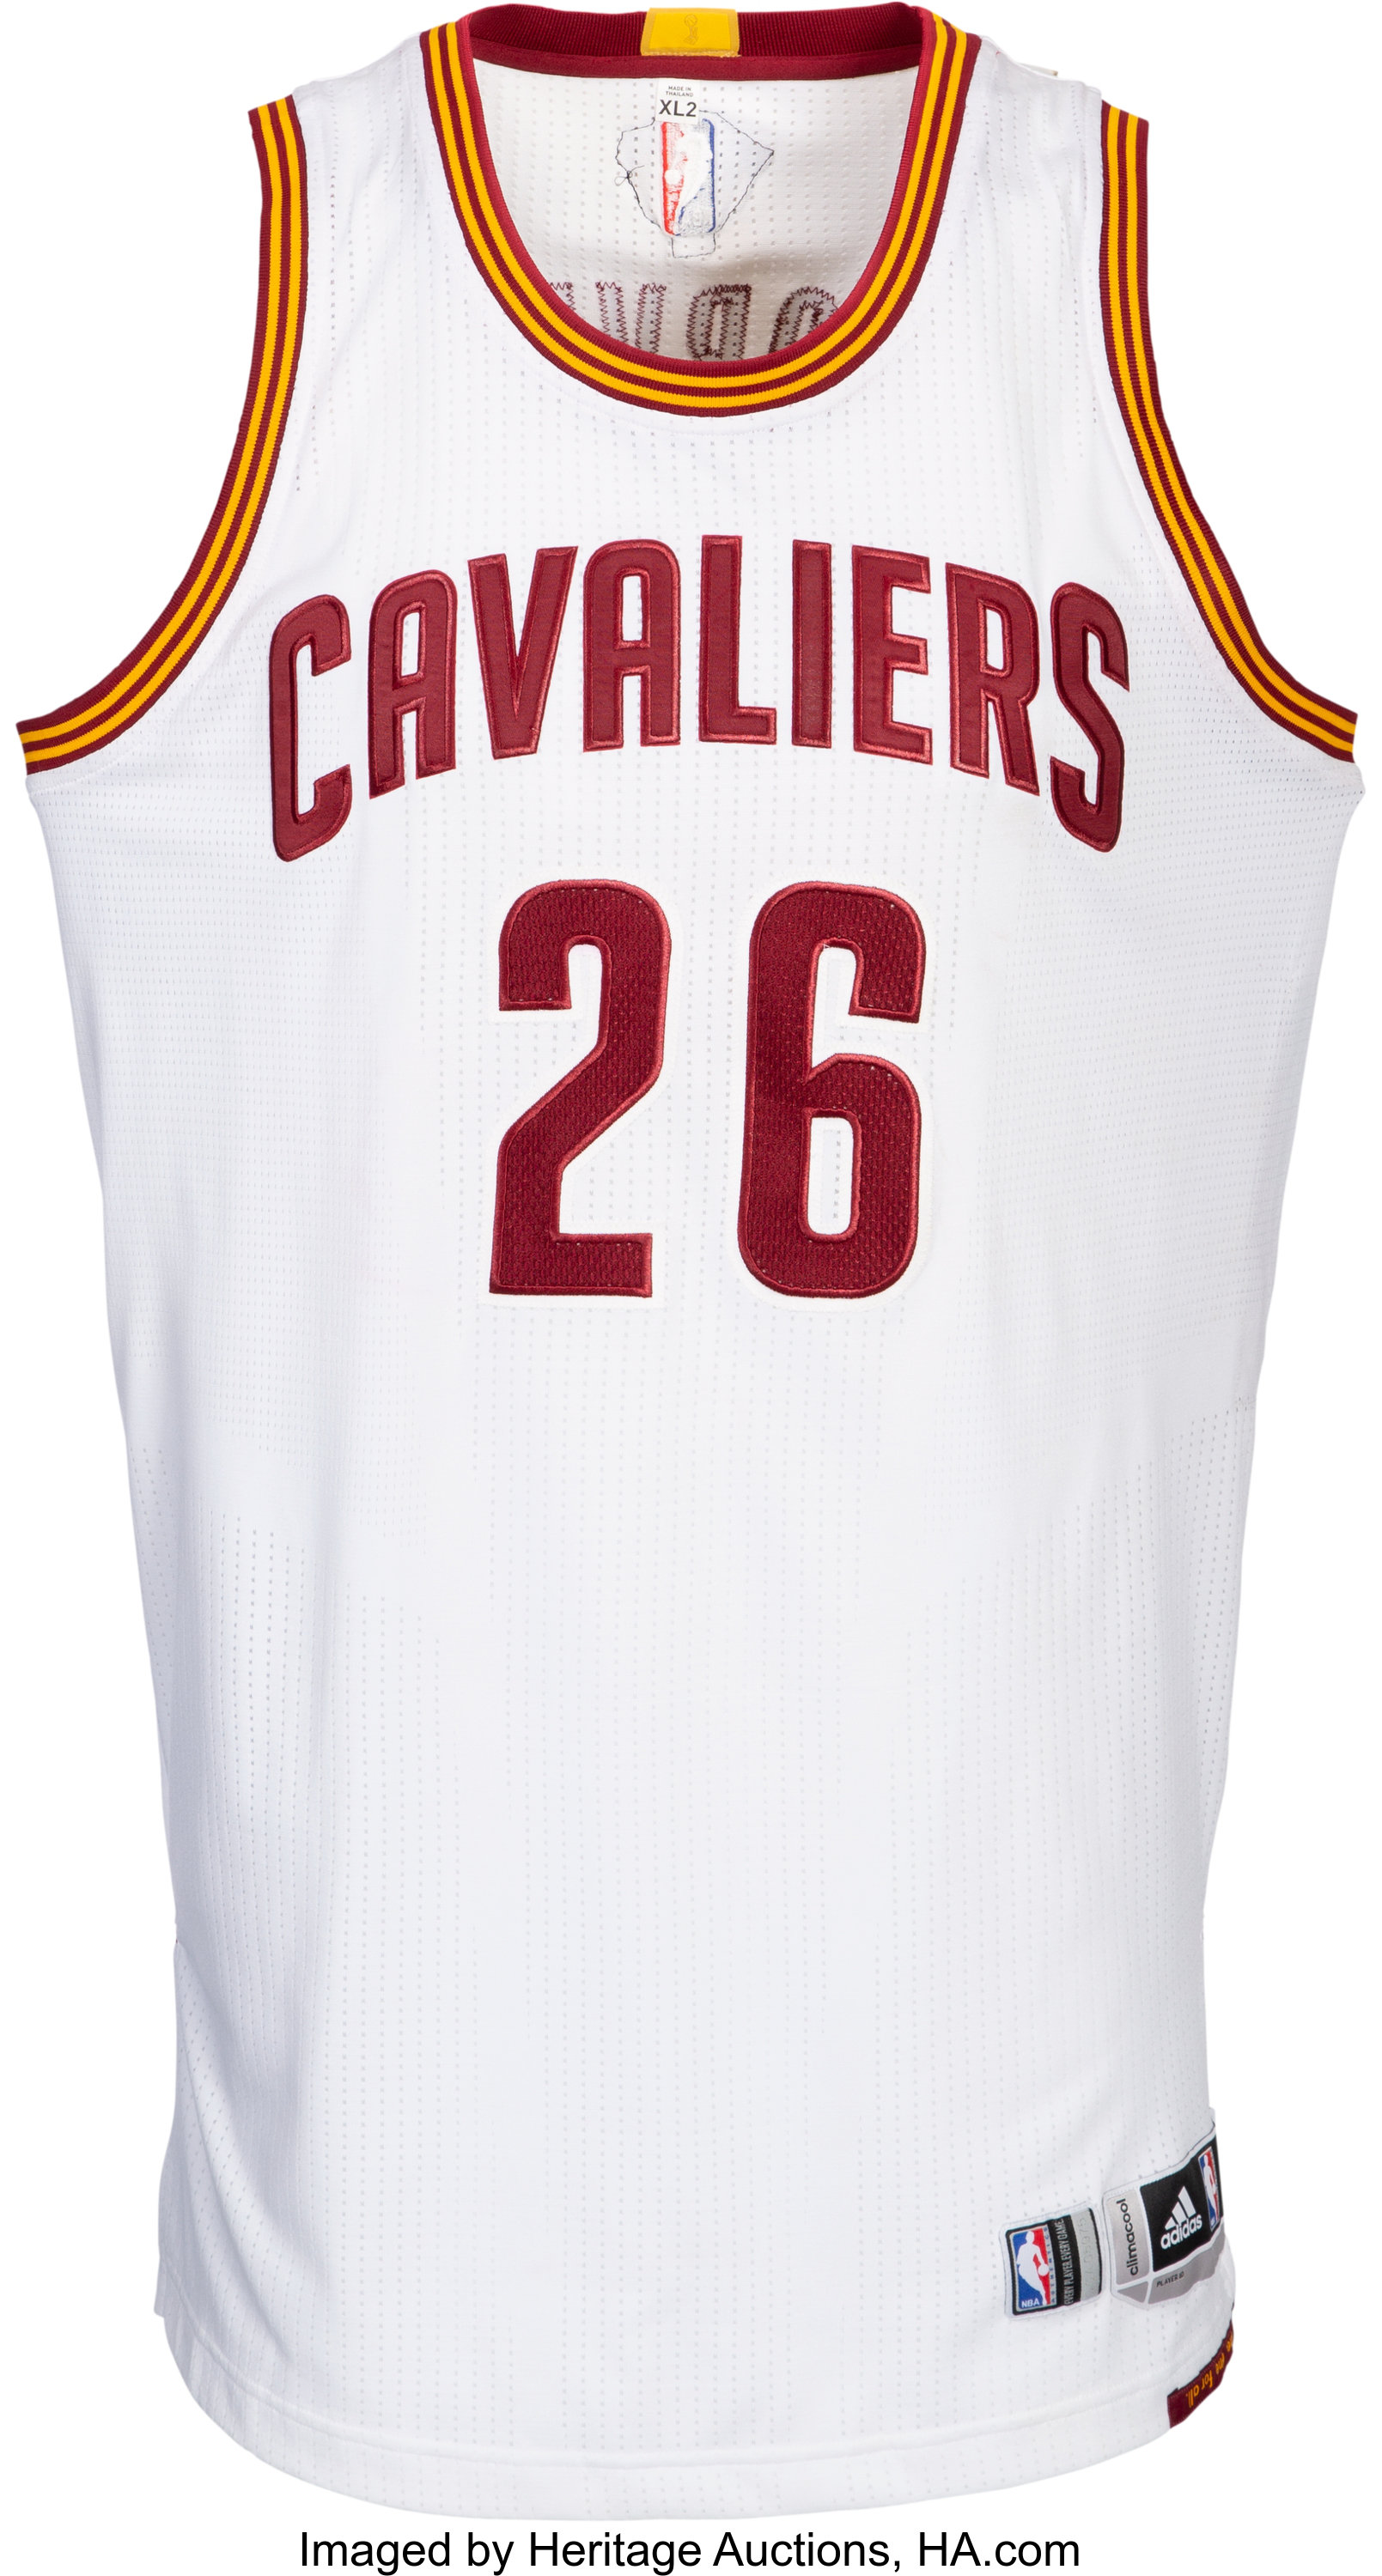 The Best Cleveland Cavaliers Gear, Jerseys, and Shirts to Wear for the NBA  Finals